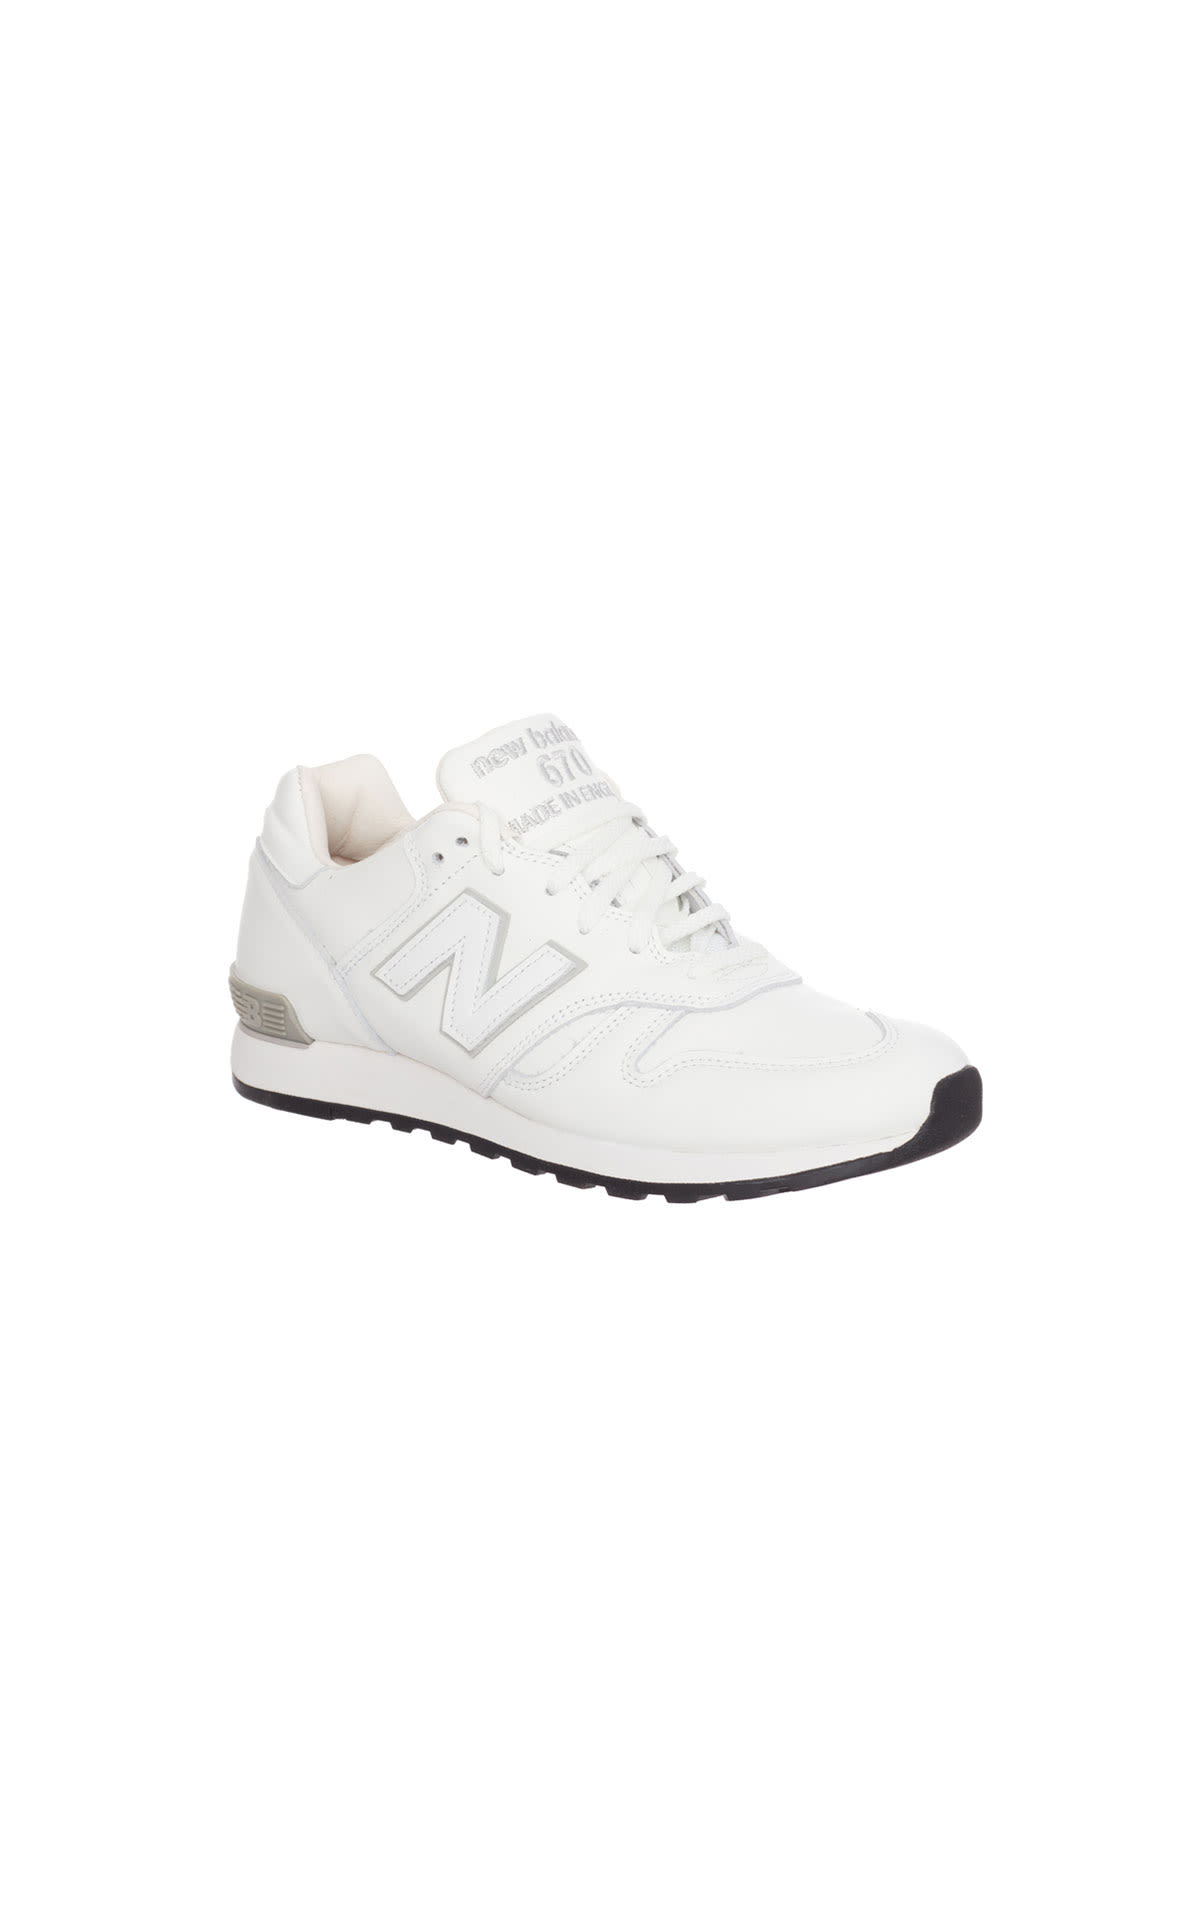 New Balance M670 sneaker from Bicester Village